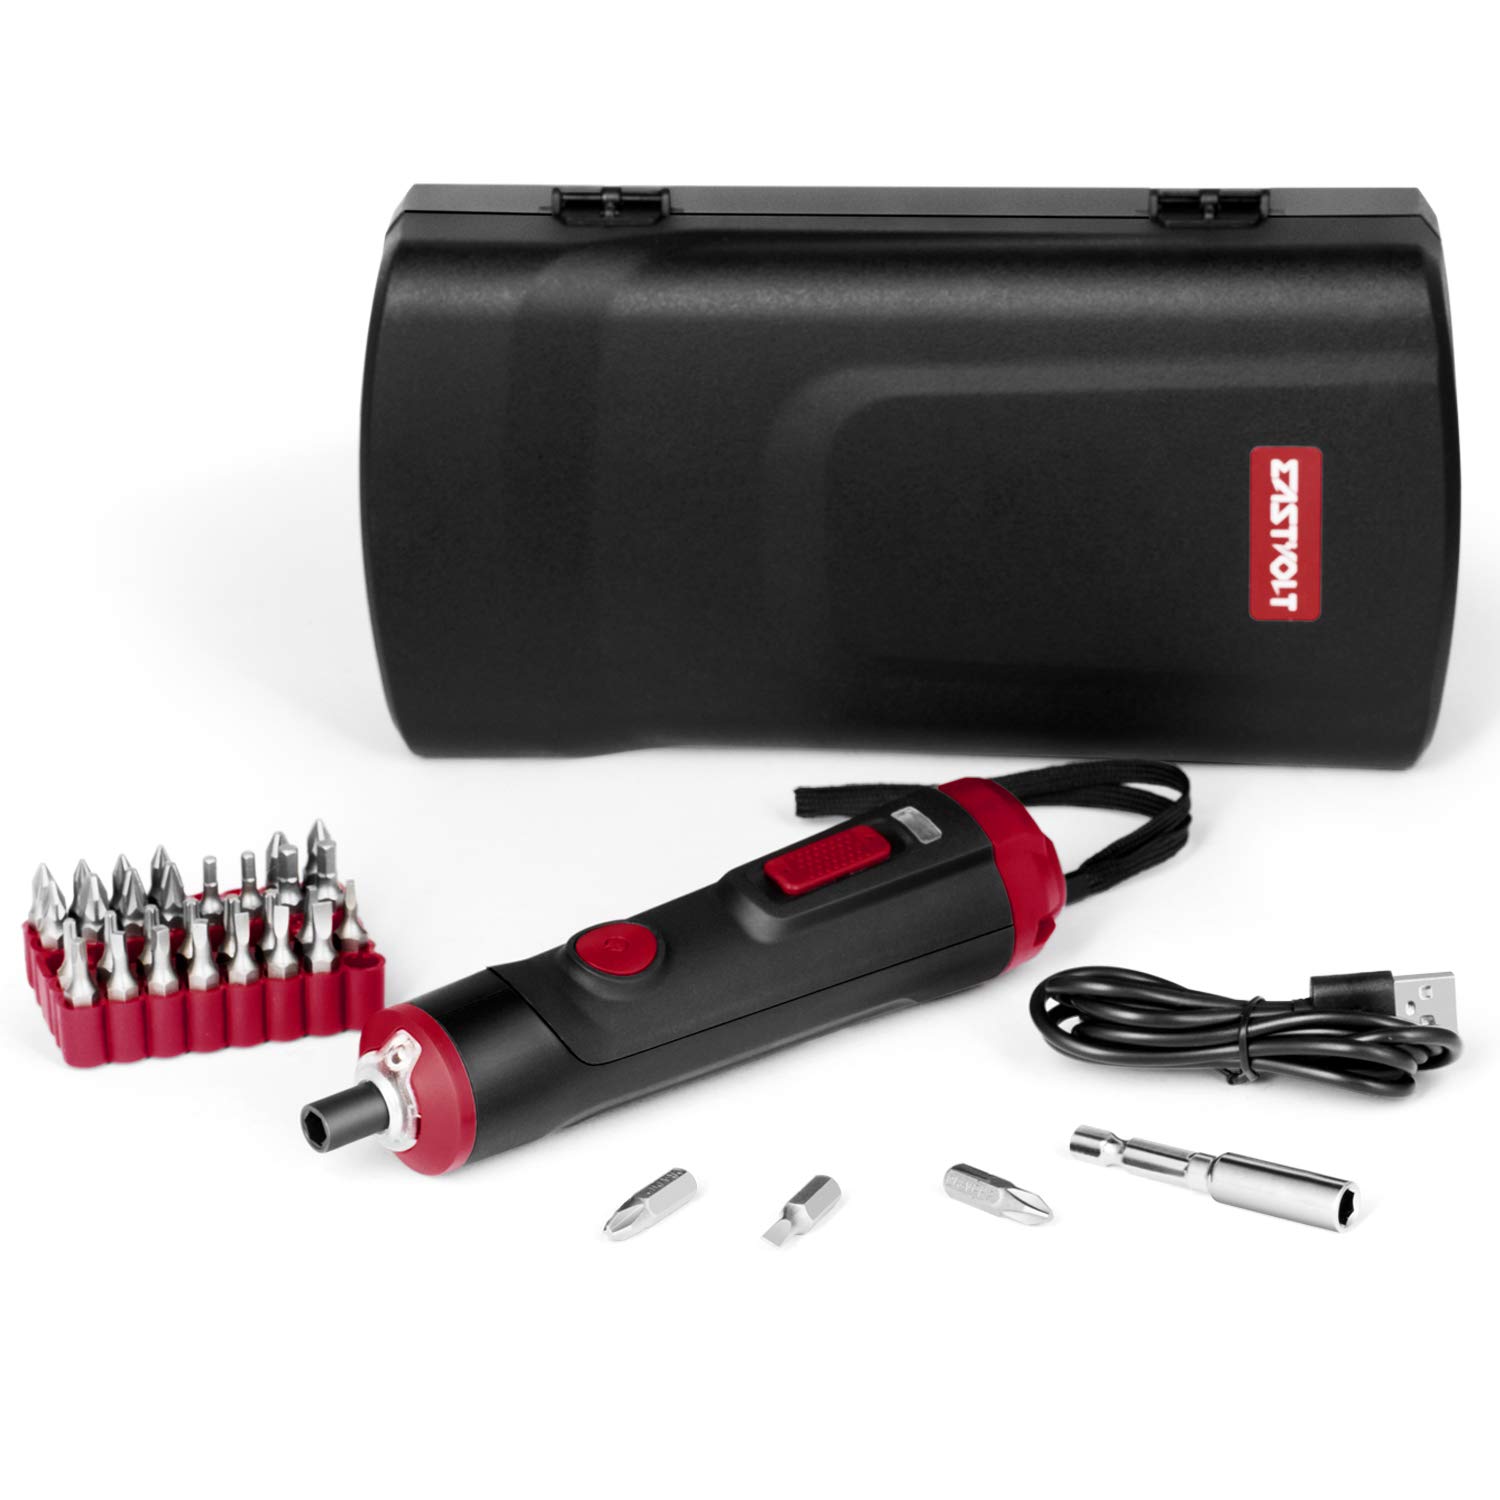 Eastvolt 4V Cordless Mini Electric Screwdriver, 1500mAh USB Rechargable Battery, 32 Pieces 1/4 in HEX Screwdriver Bits, 1 Piece Extension Holder and Storage Toolbox